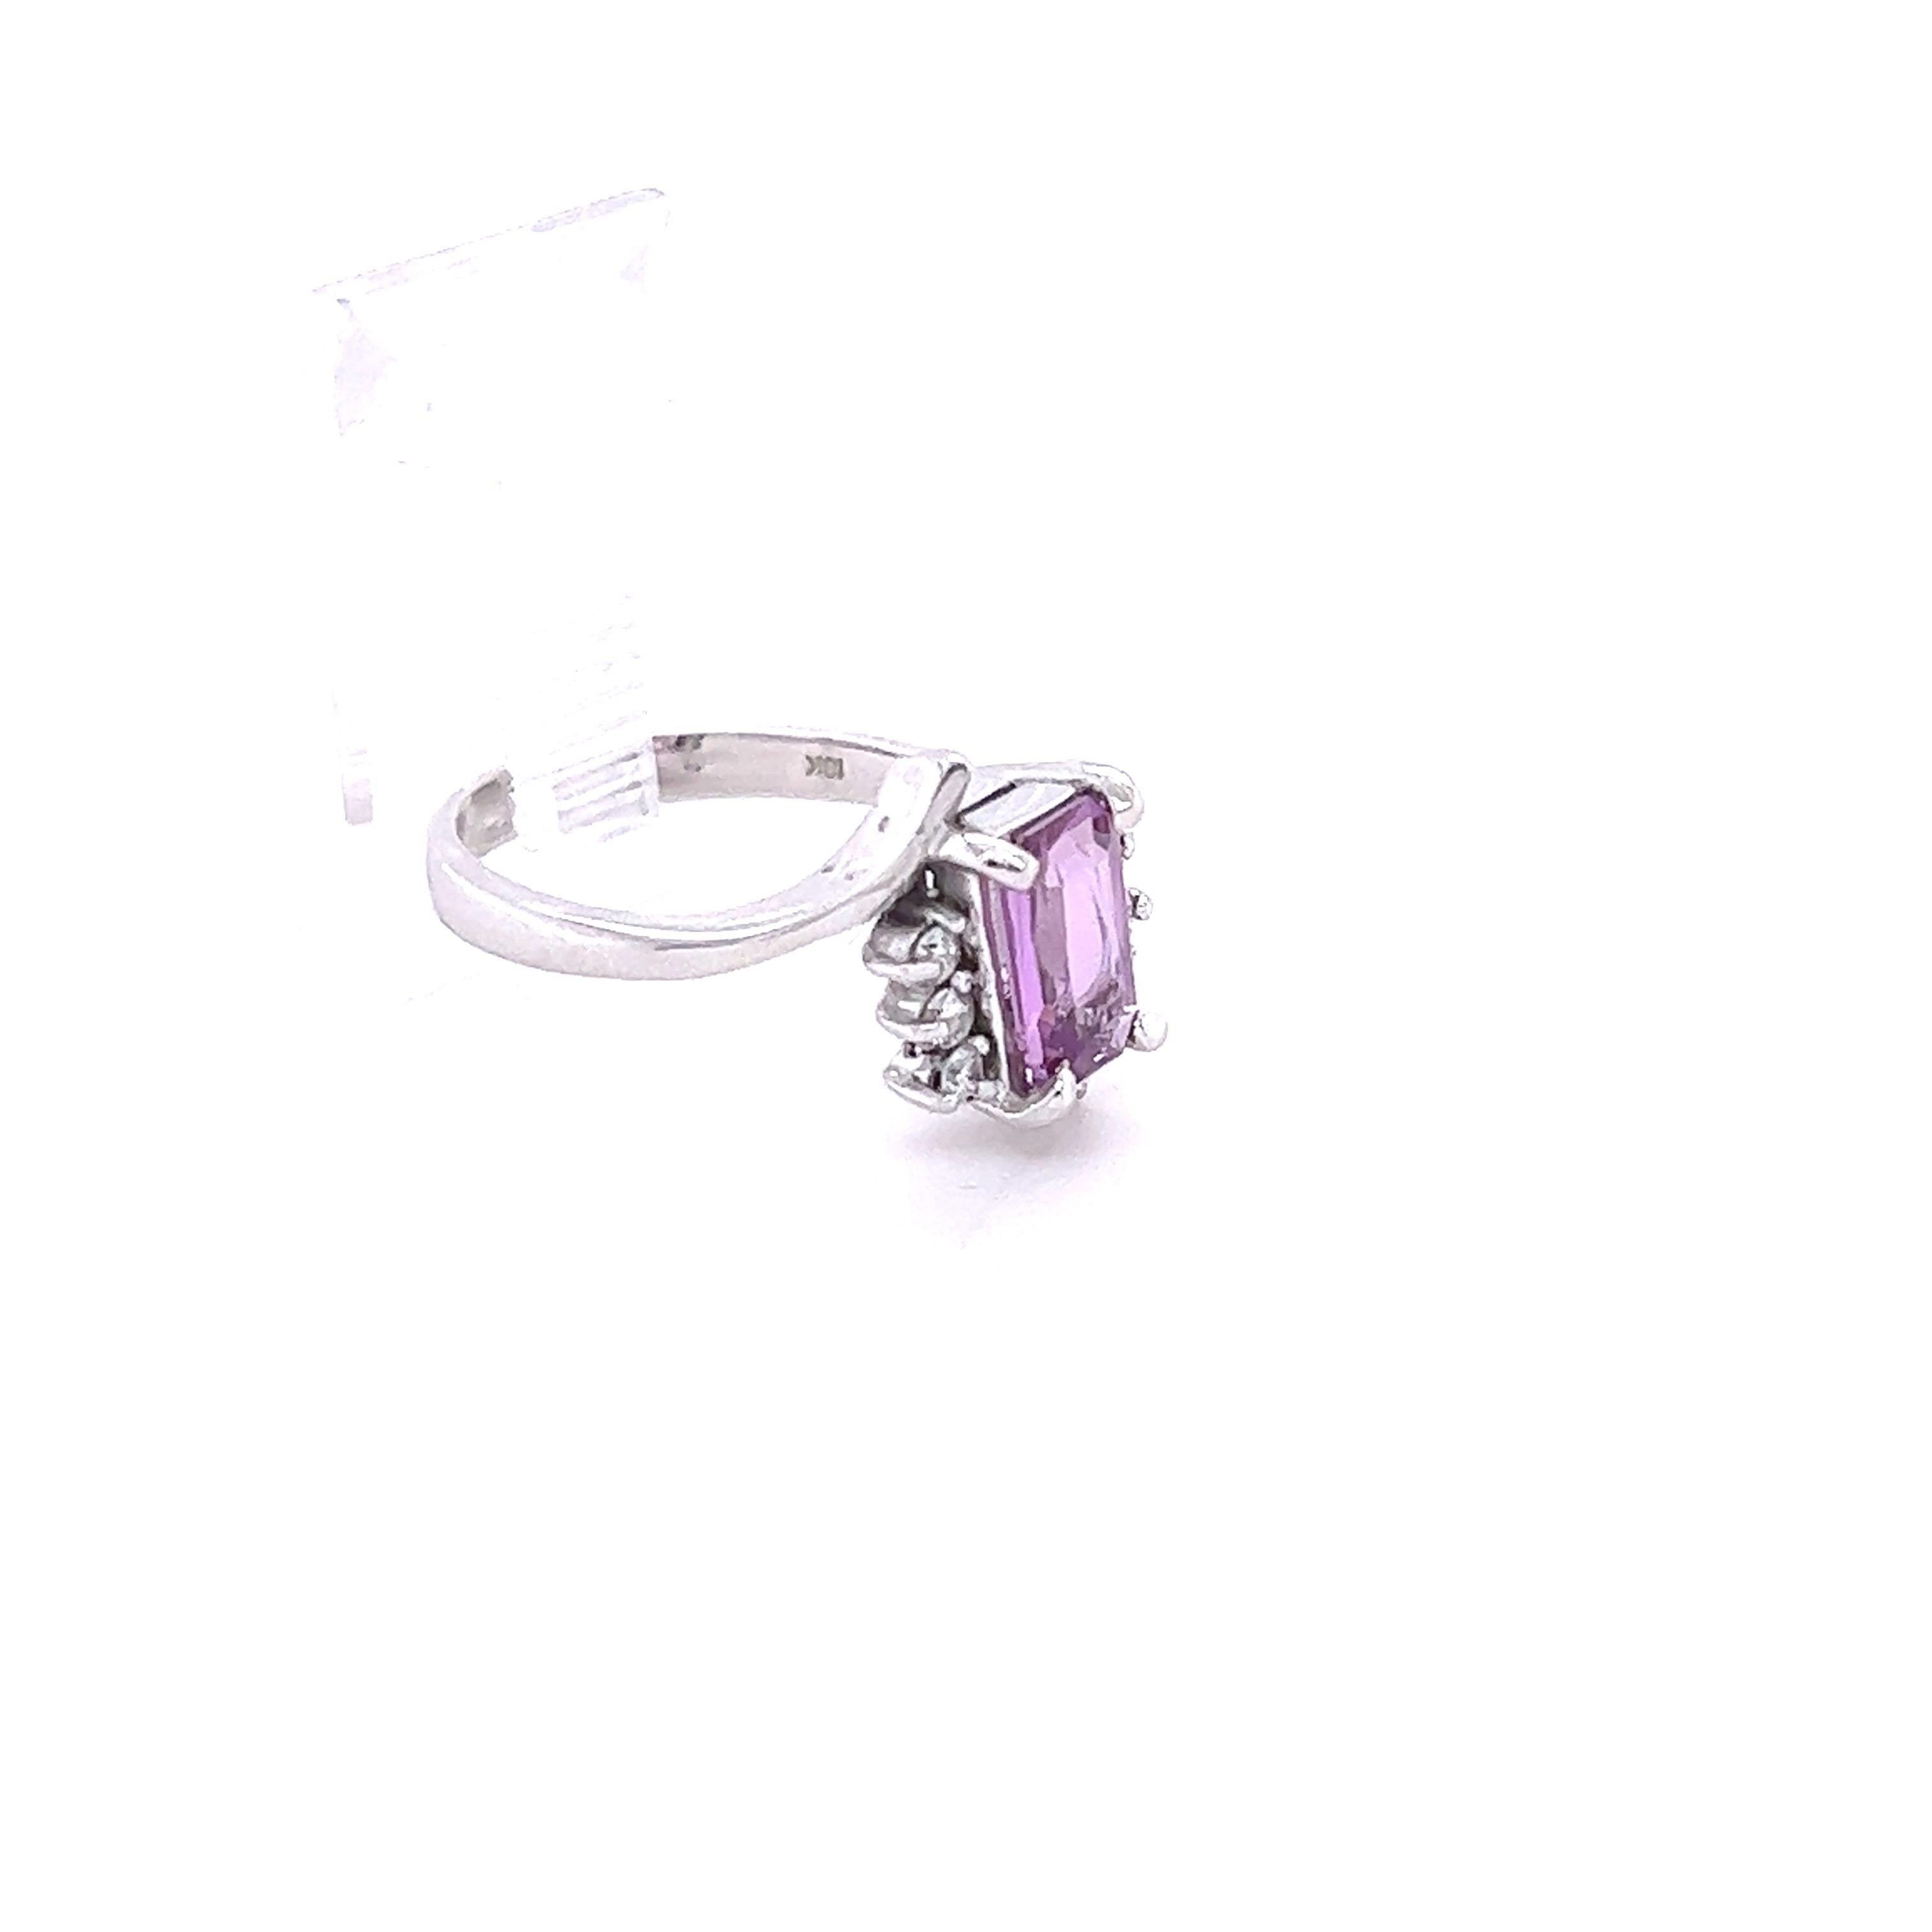 This beautiful ring has a Natural Emerald Cut Pink Sapphire that weighs 1.37 Carats and measures at approximately 9 mm x 5 mm. The Pink Sapphire is GIA Certified and does NOT show indications of heating. The GIA Certificate Number is: